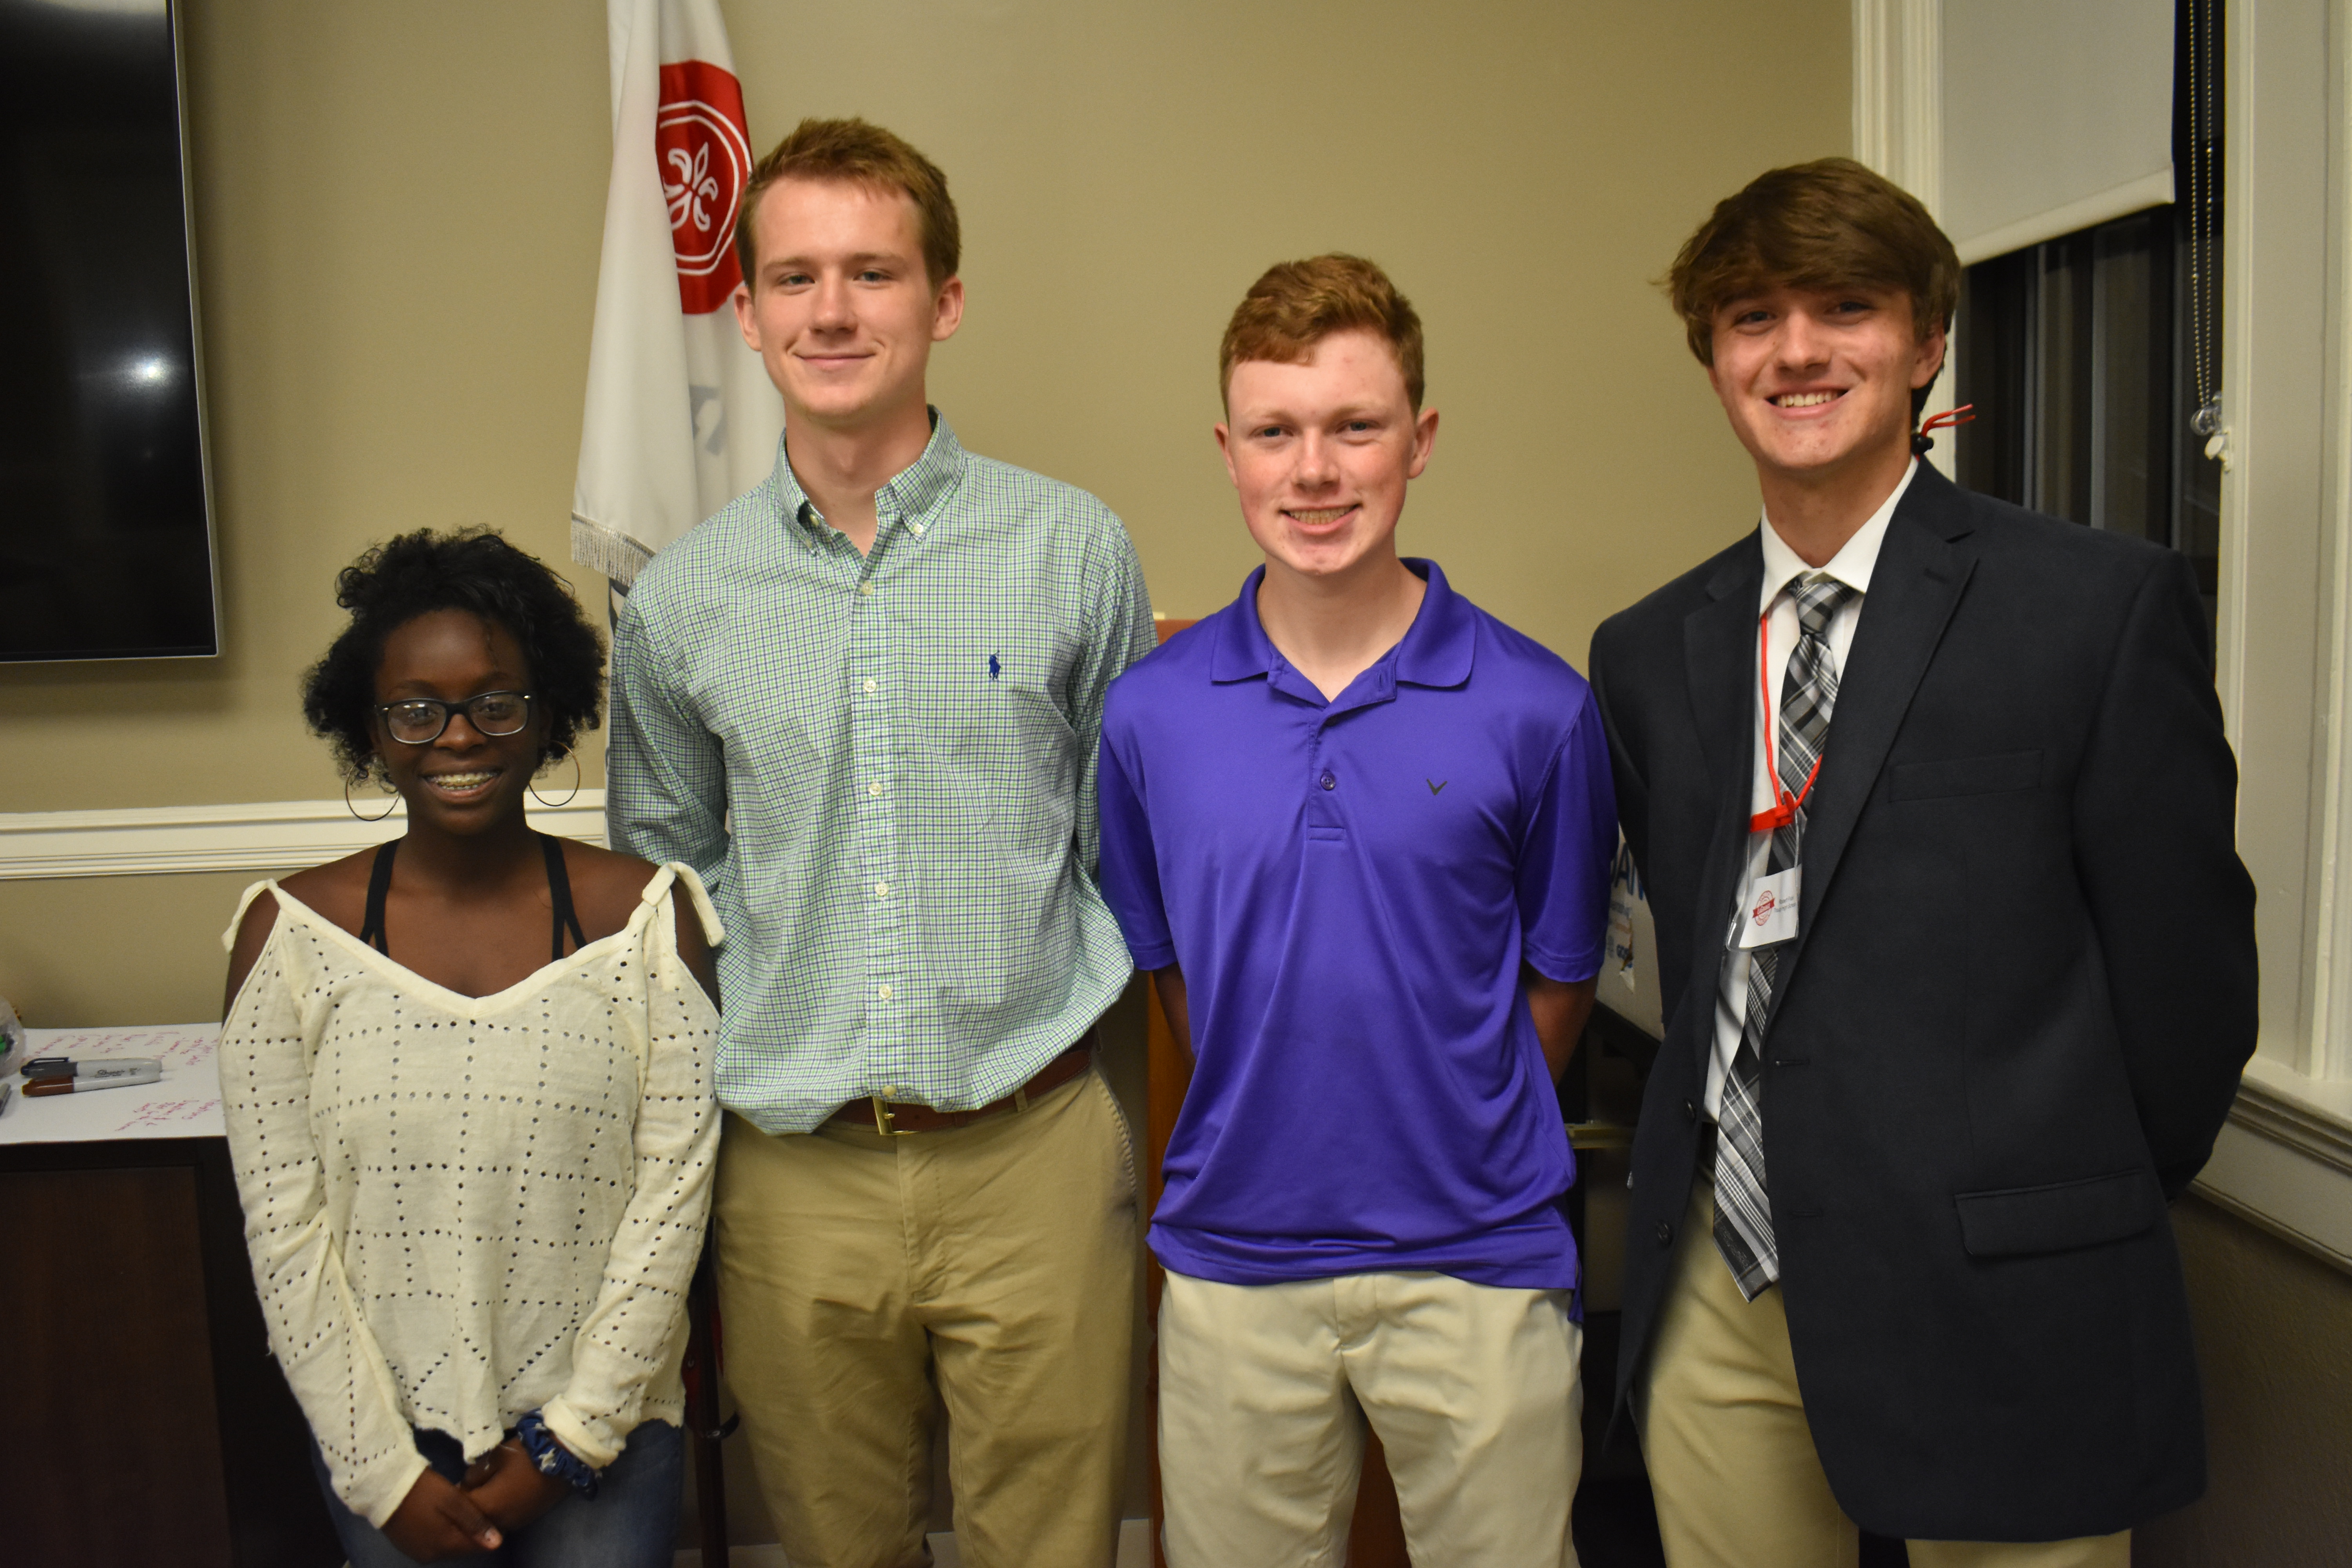 LaGrange Youth Council Executive Leaders pictured which consists of four high school students